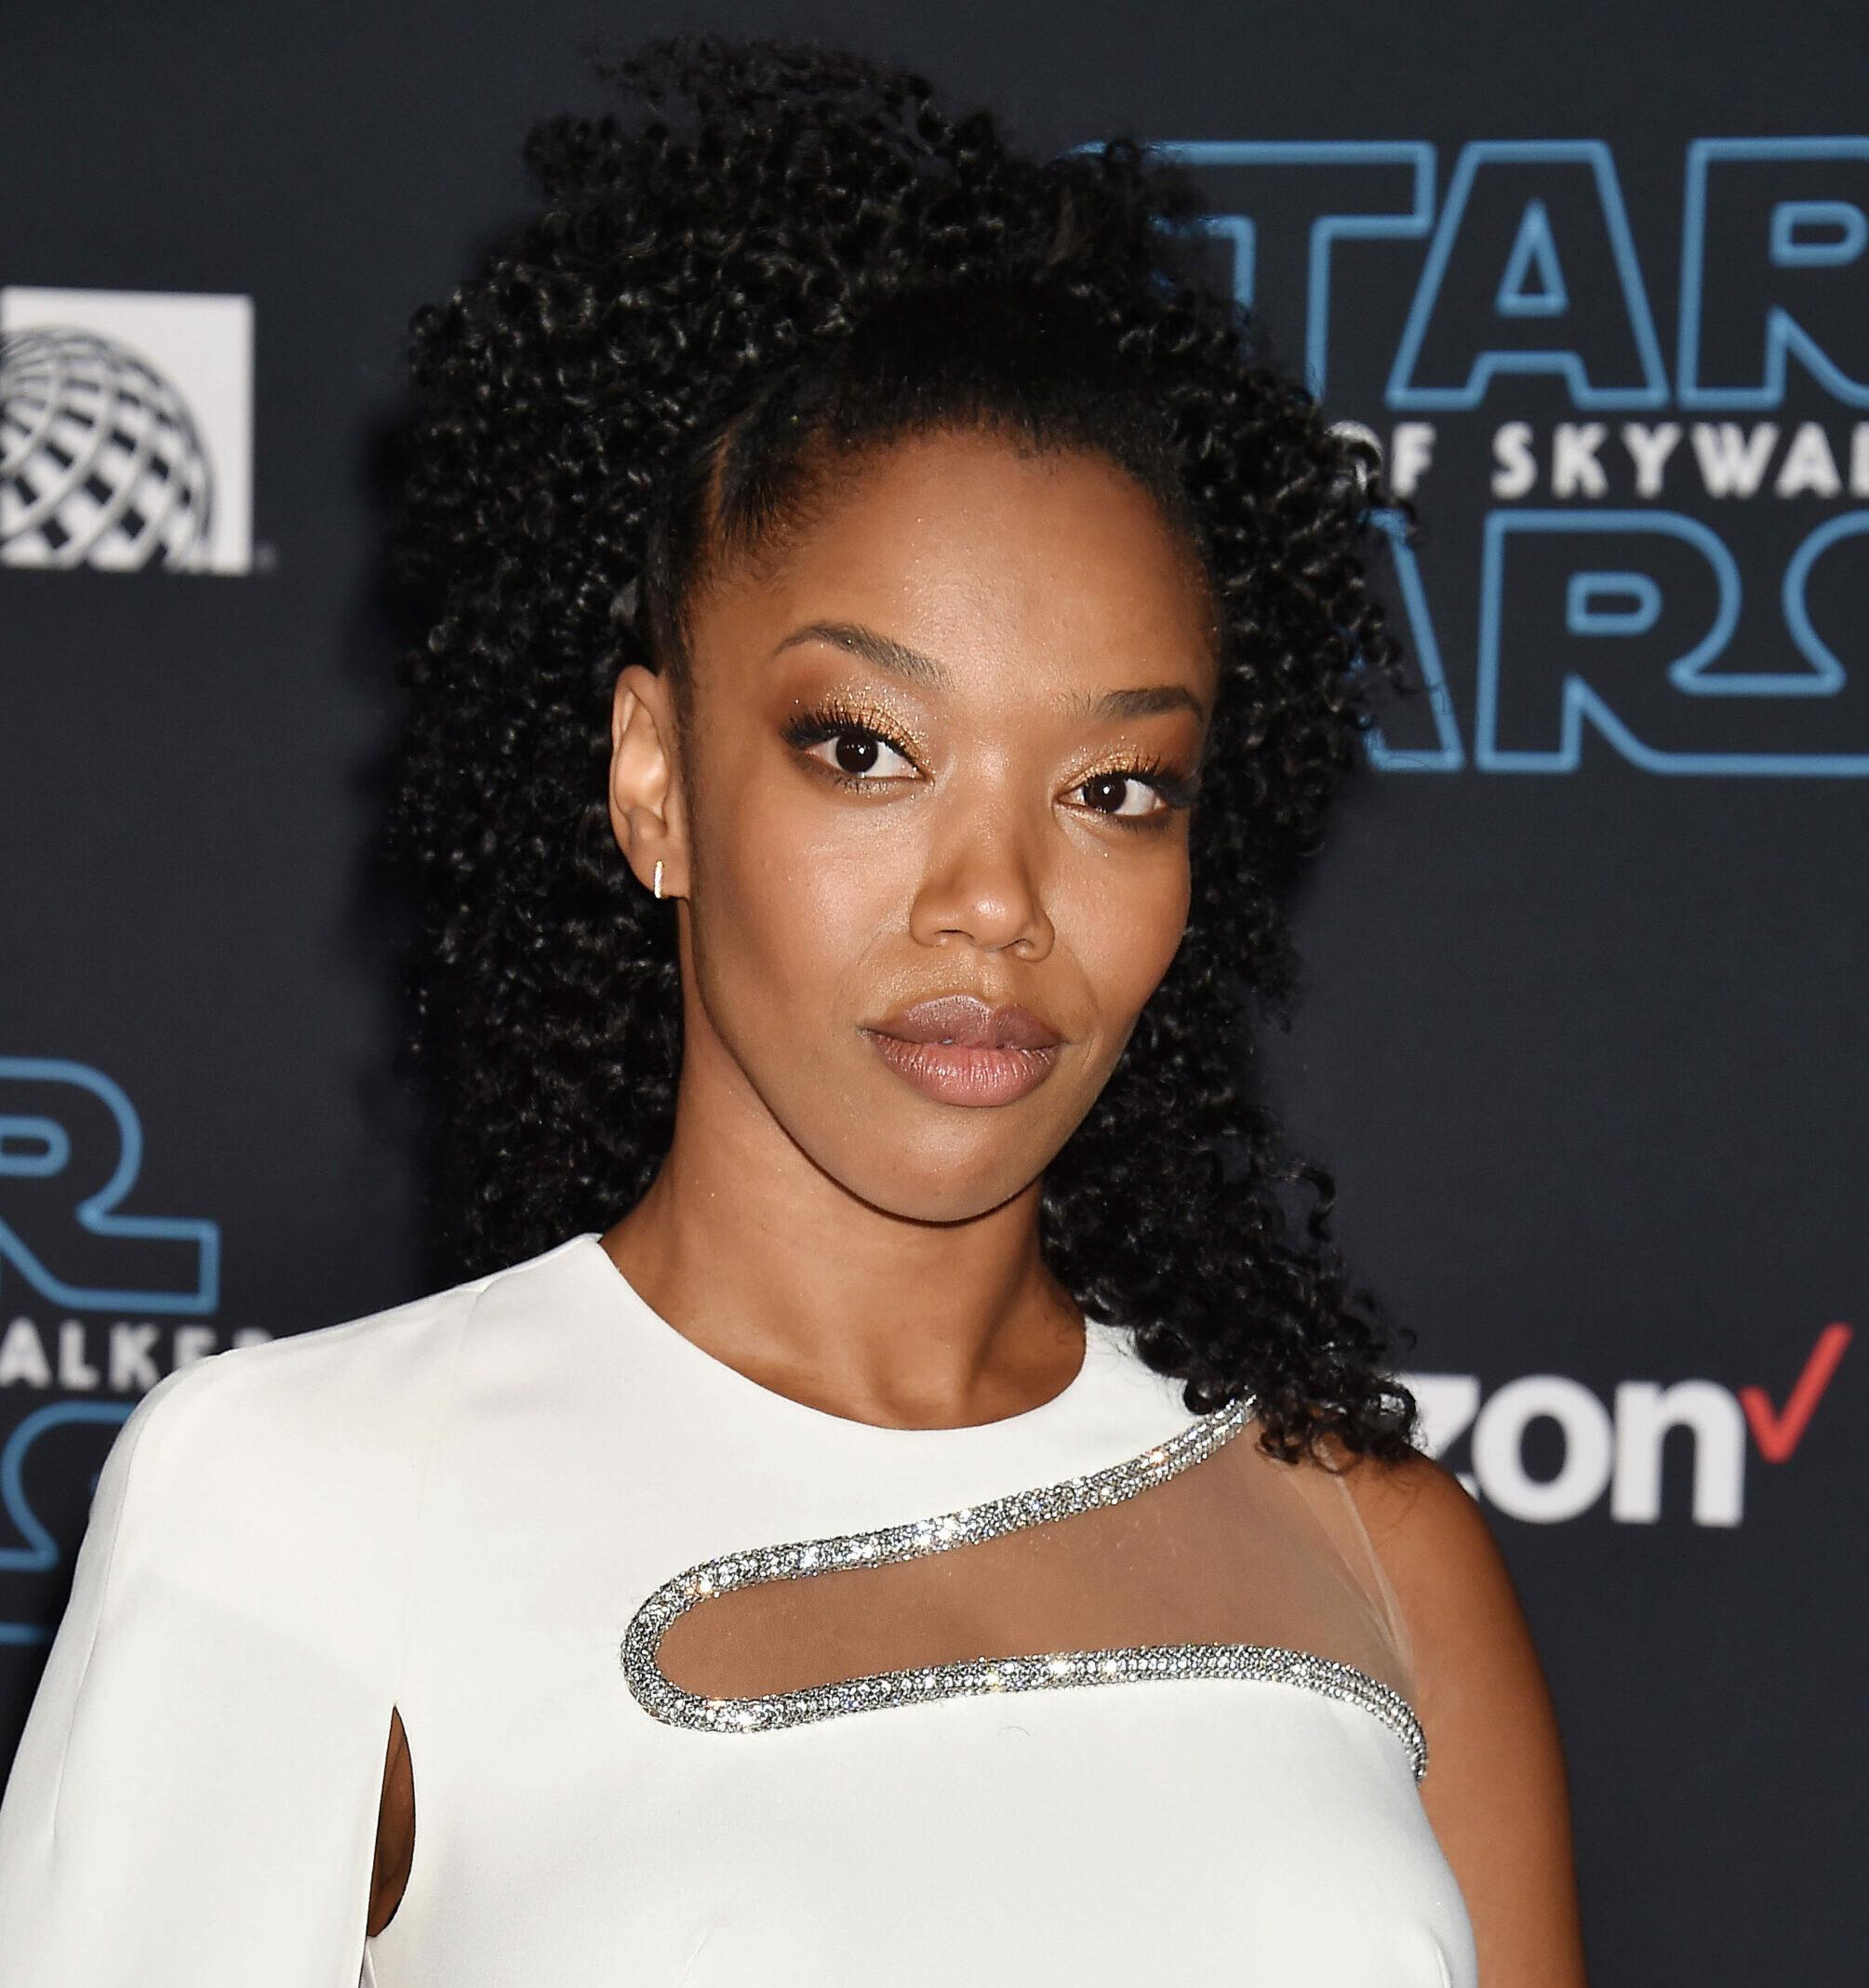 Naomi Ackie At The Premiere Of Disney's "Star Wars The Rise Of Skywalker"